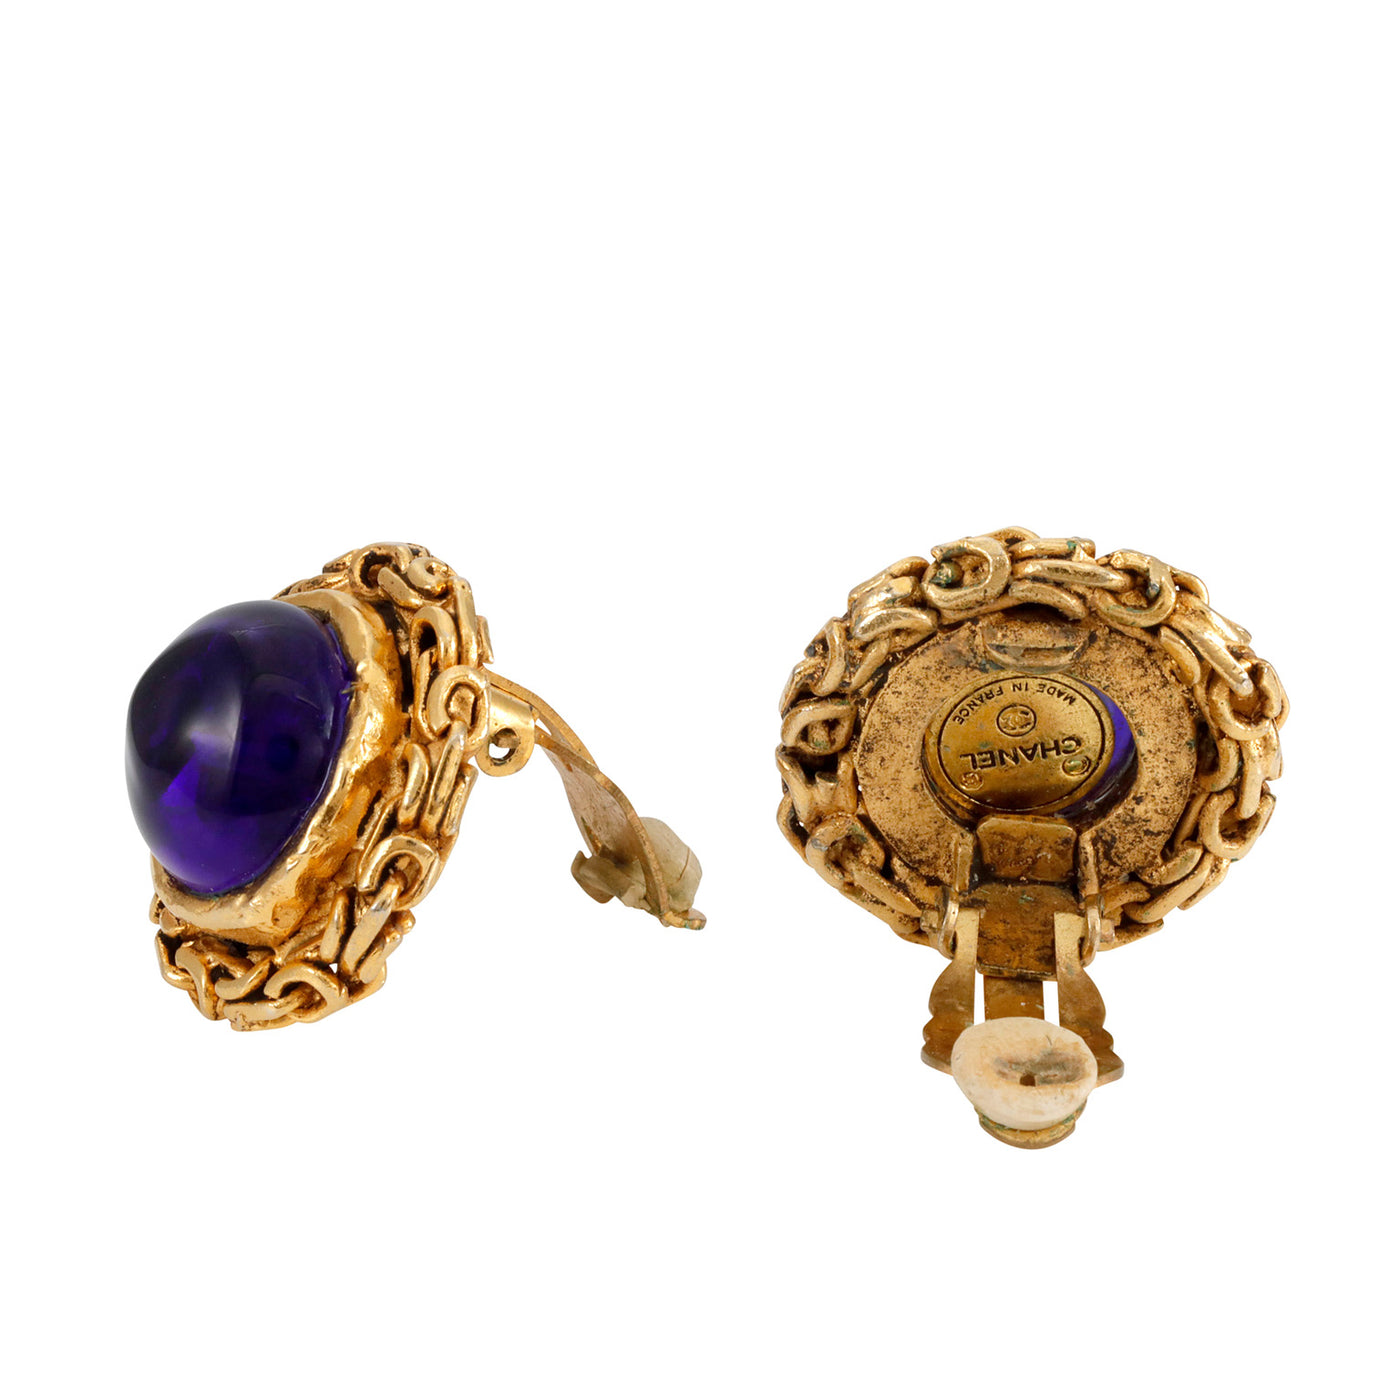 Chanel Vintage Blue Gripoix Earrings with Gold Chain Detail